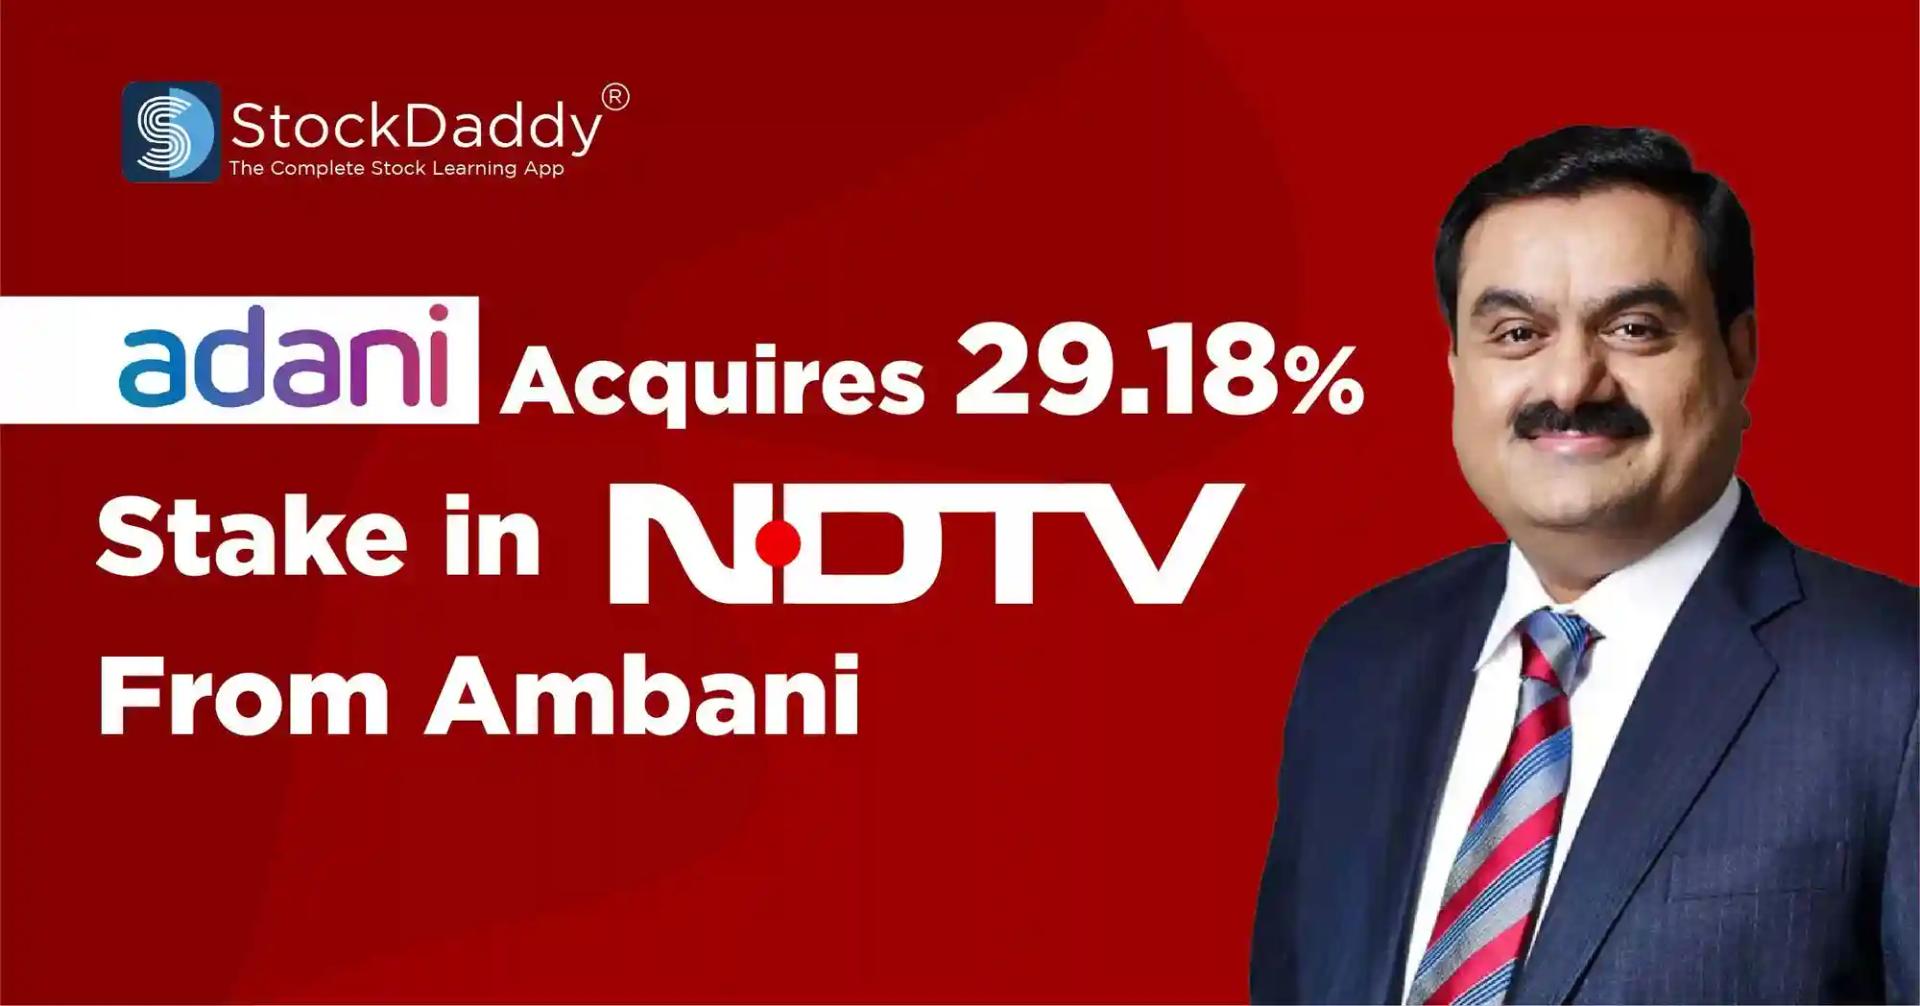 Adani Acquires 29.18% stake in NDTV from Ambani - Launches open offer to Buy more